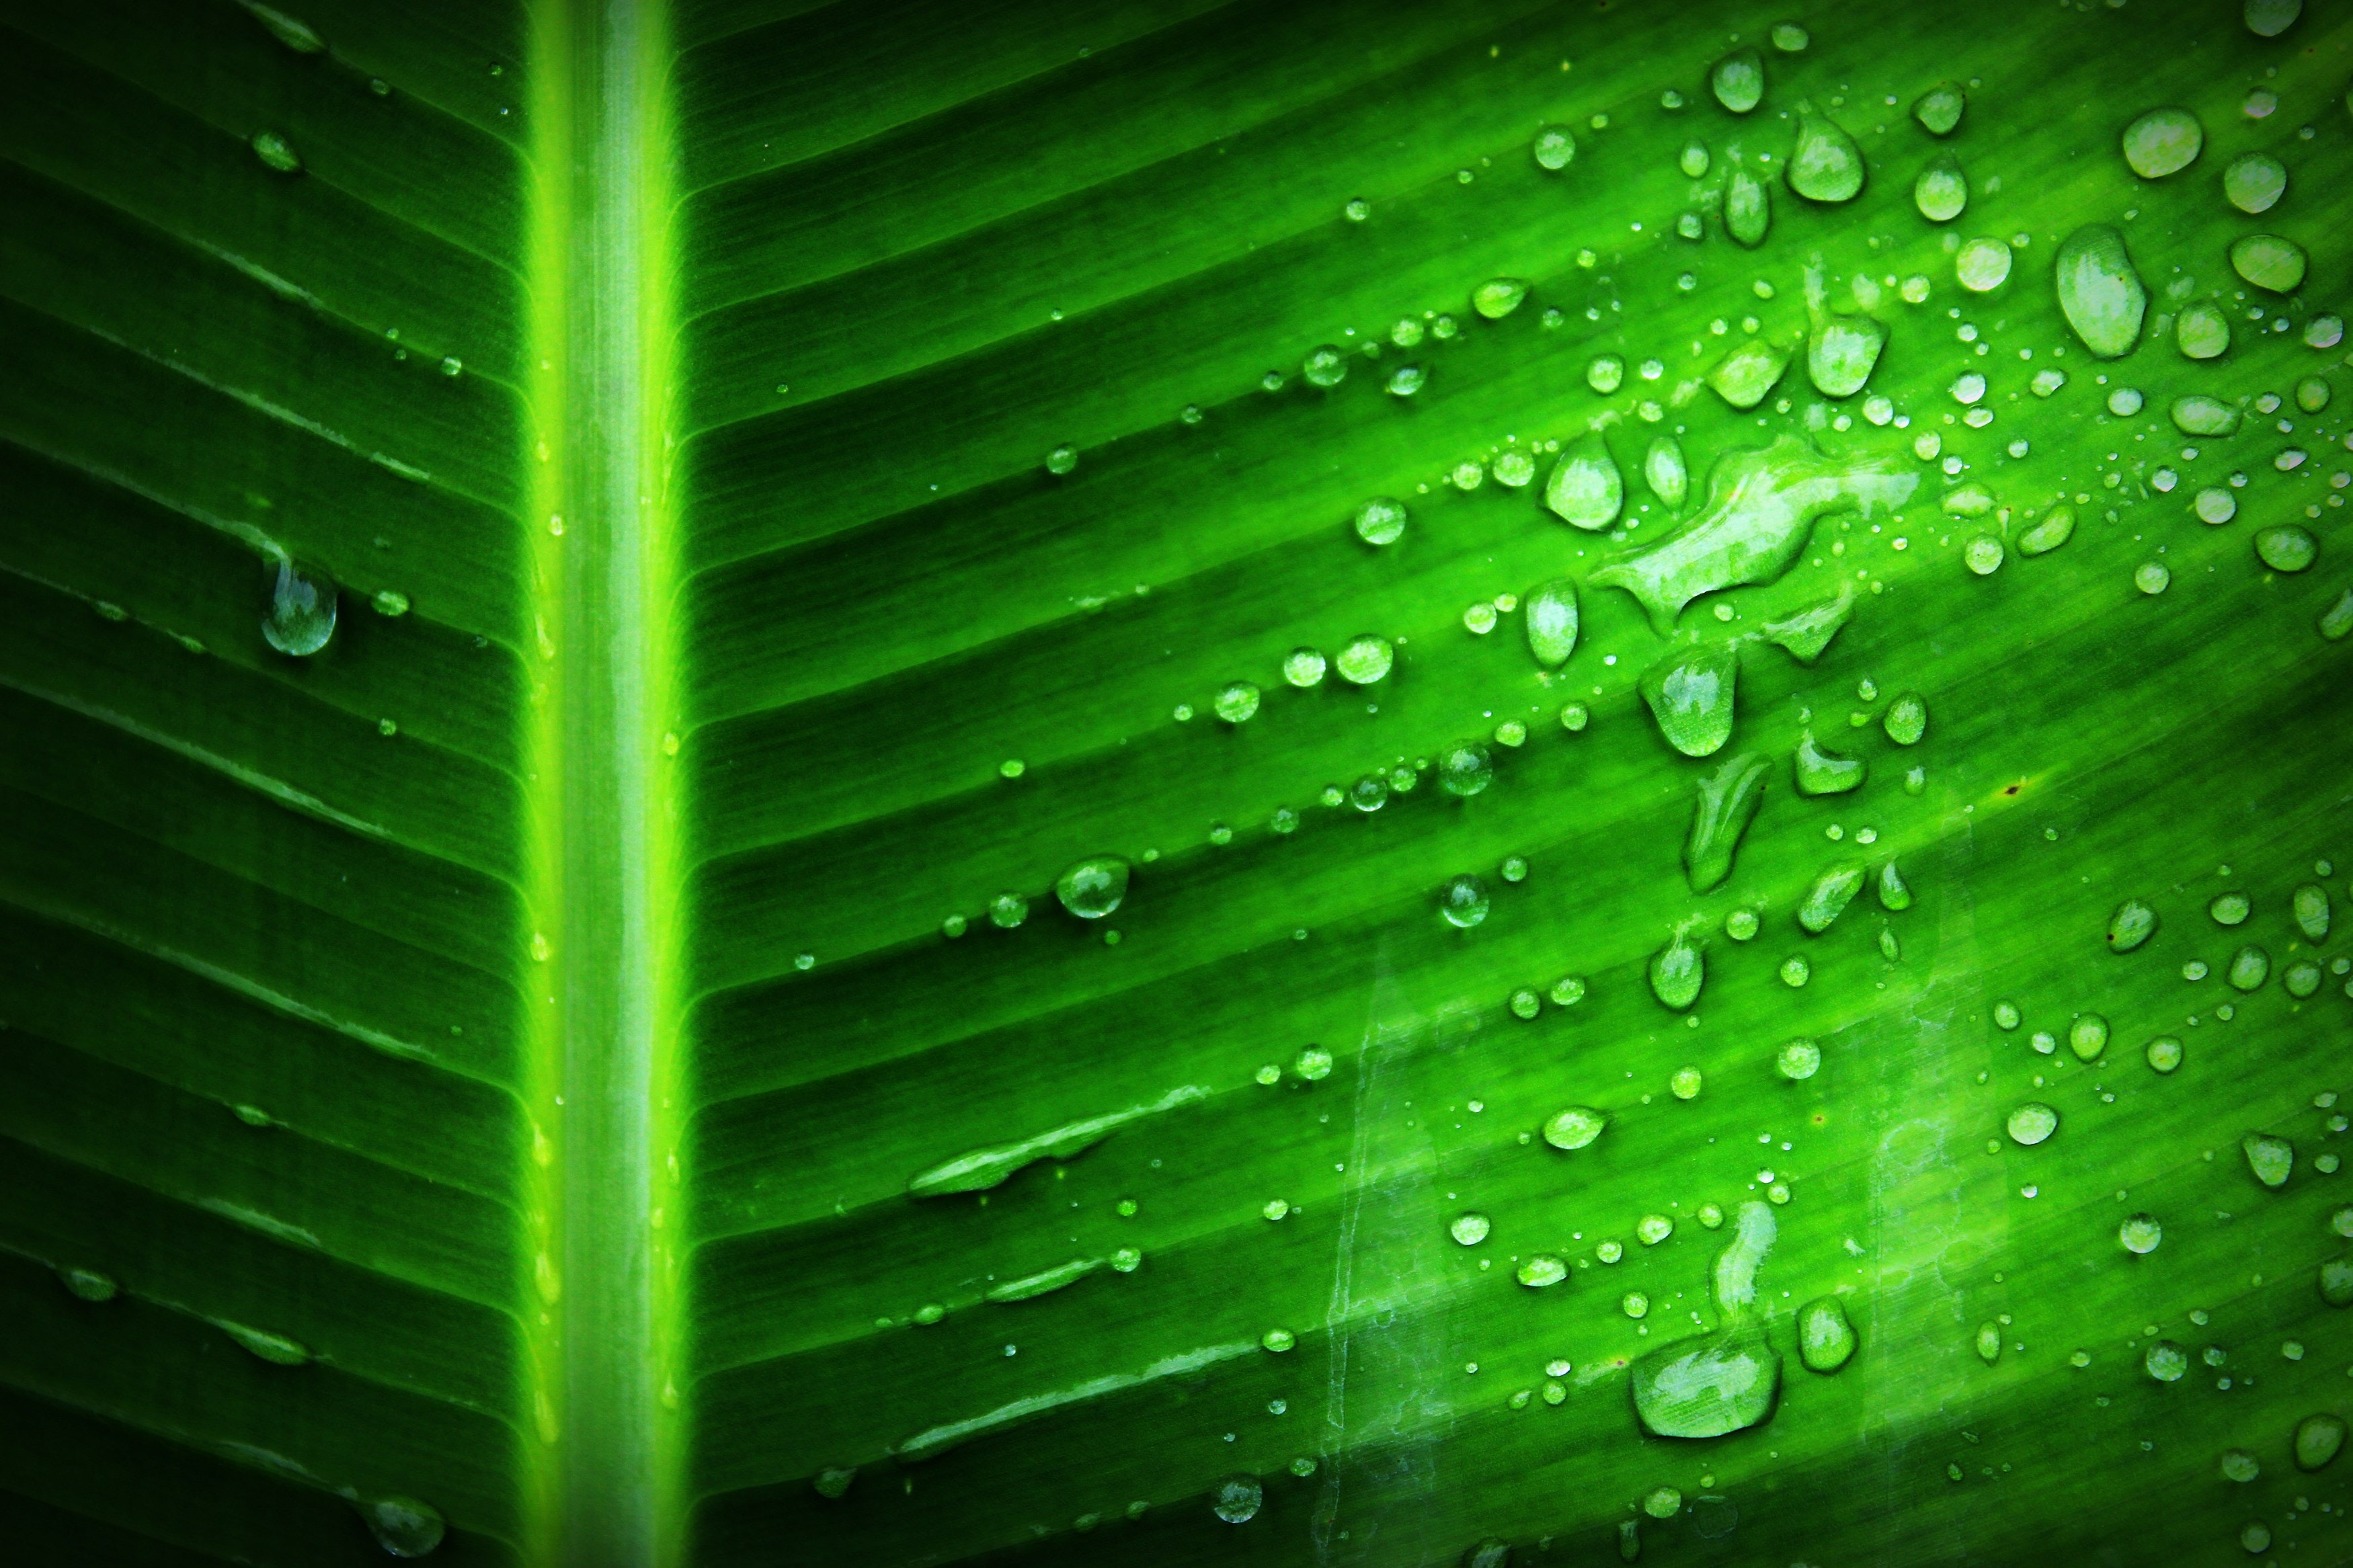 Green Banana Leaf With Substance of Clear Liquid · Free Stock Photo